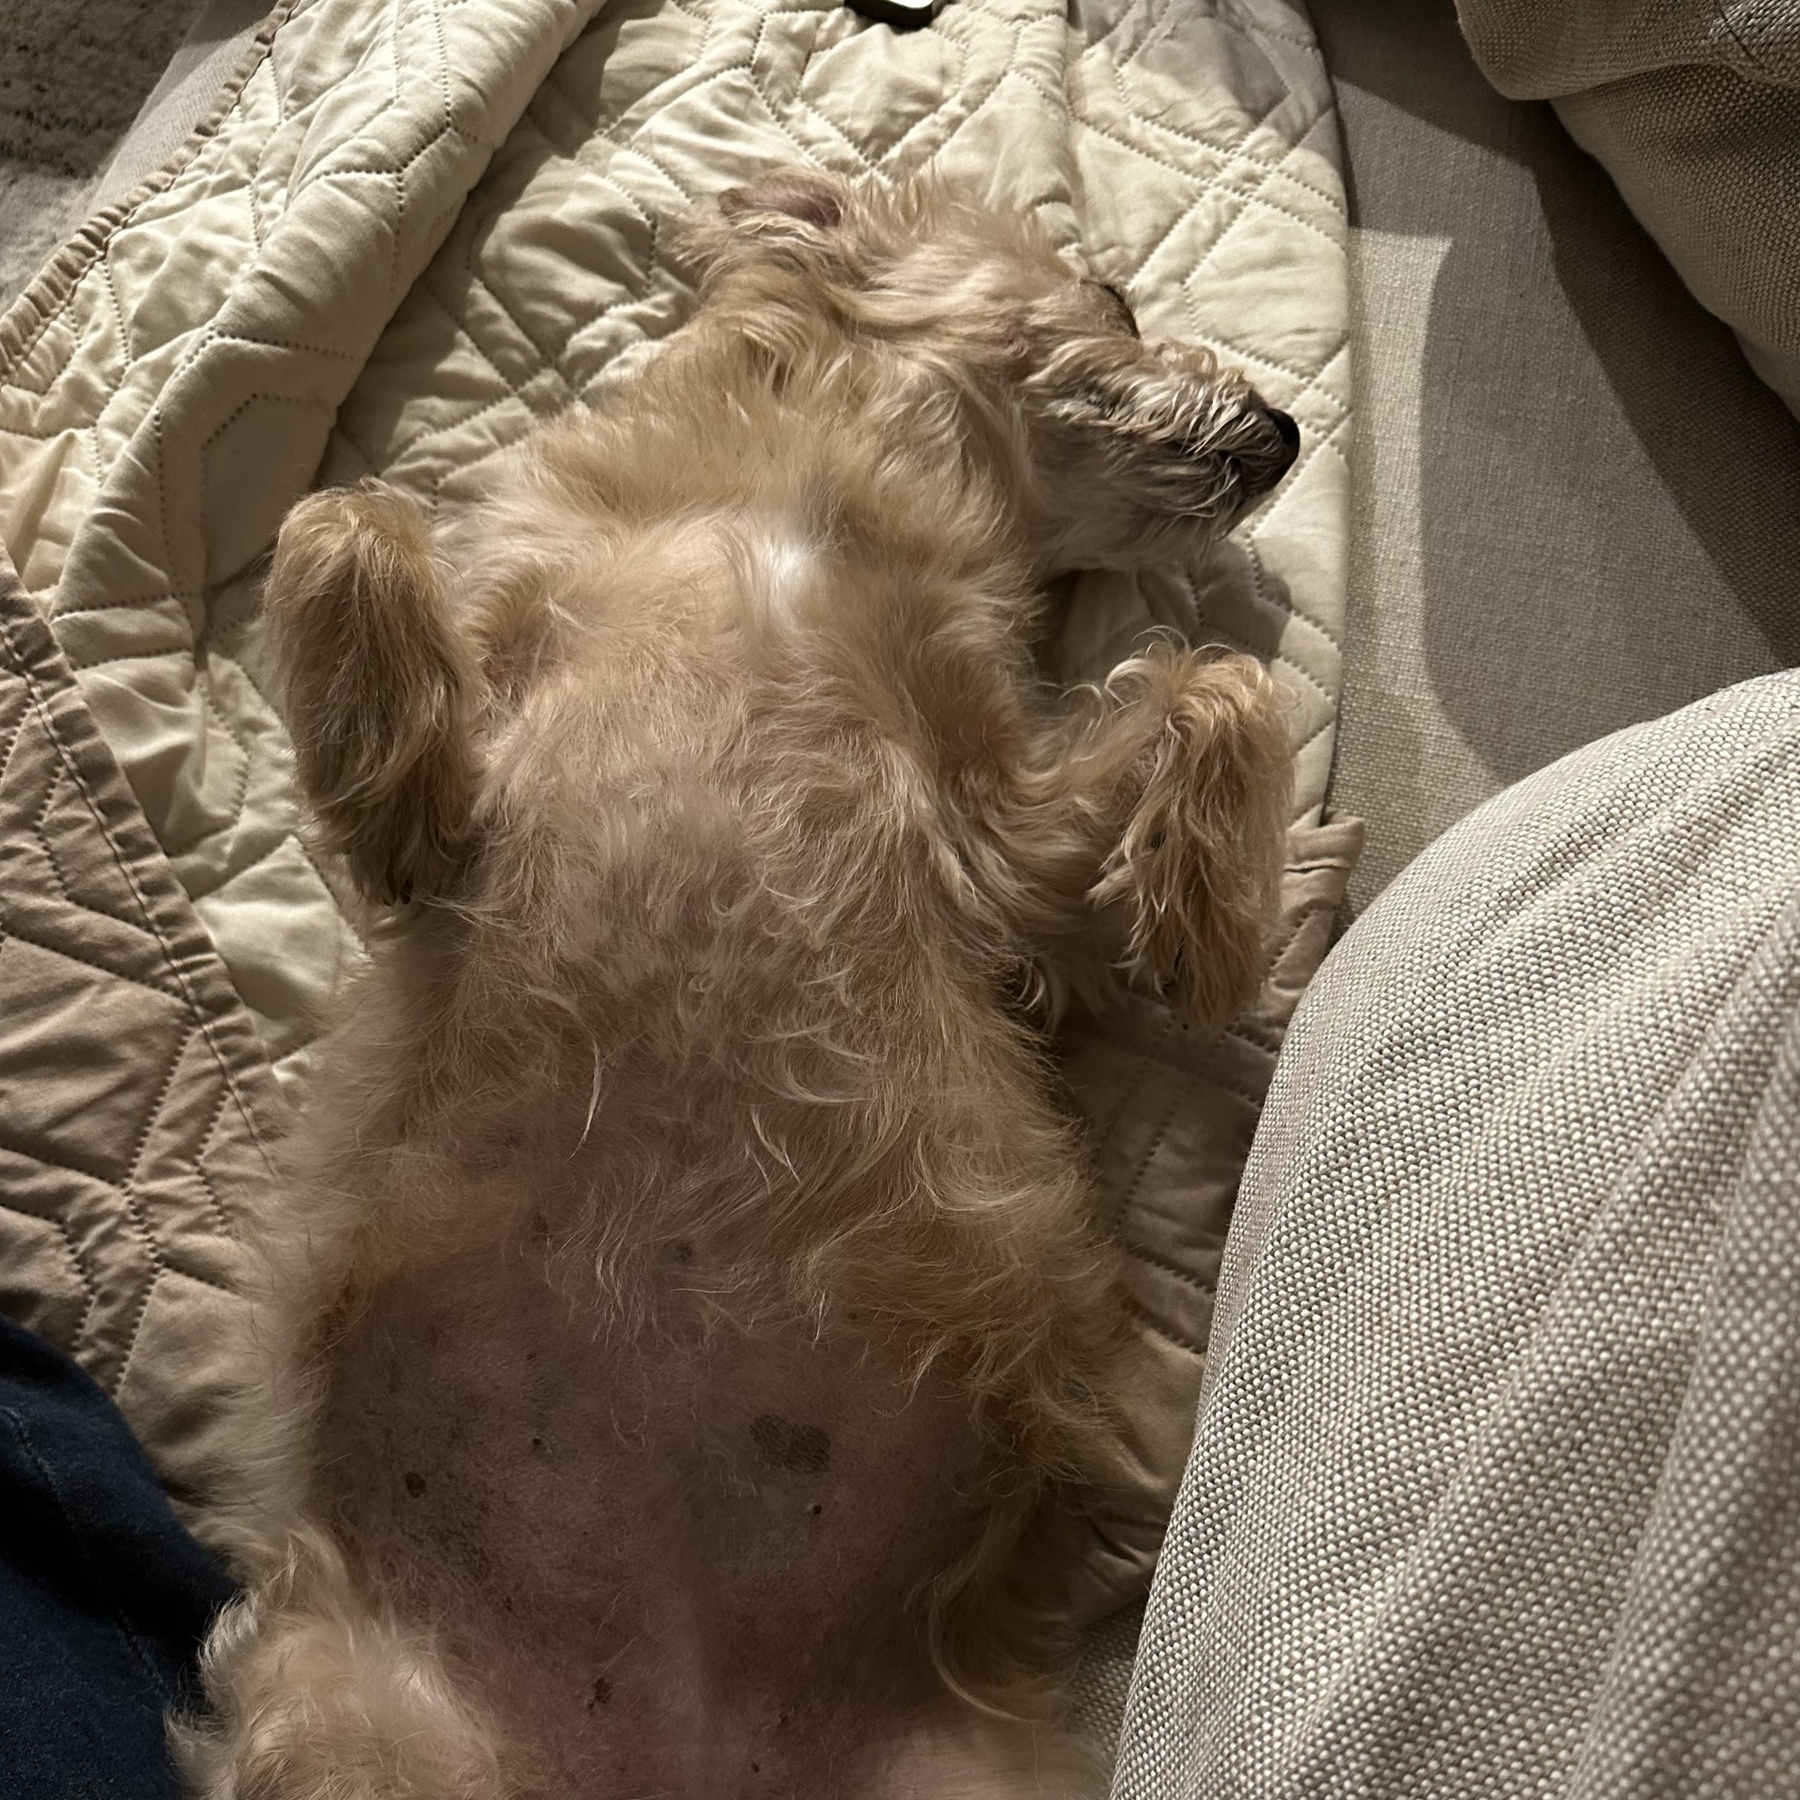 Brandy, a cairn terrier mix, sleeping soundly on her back.